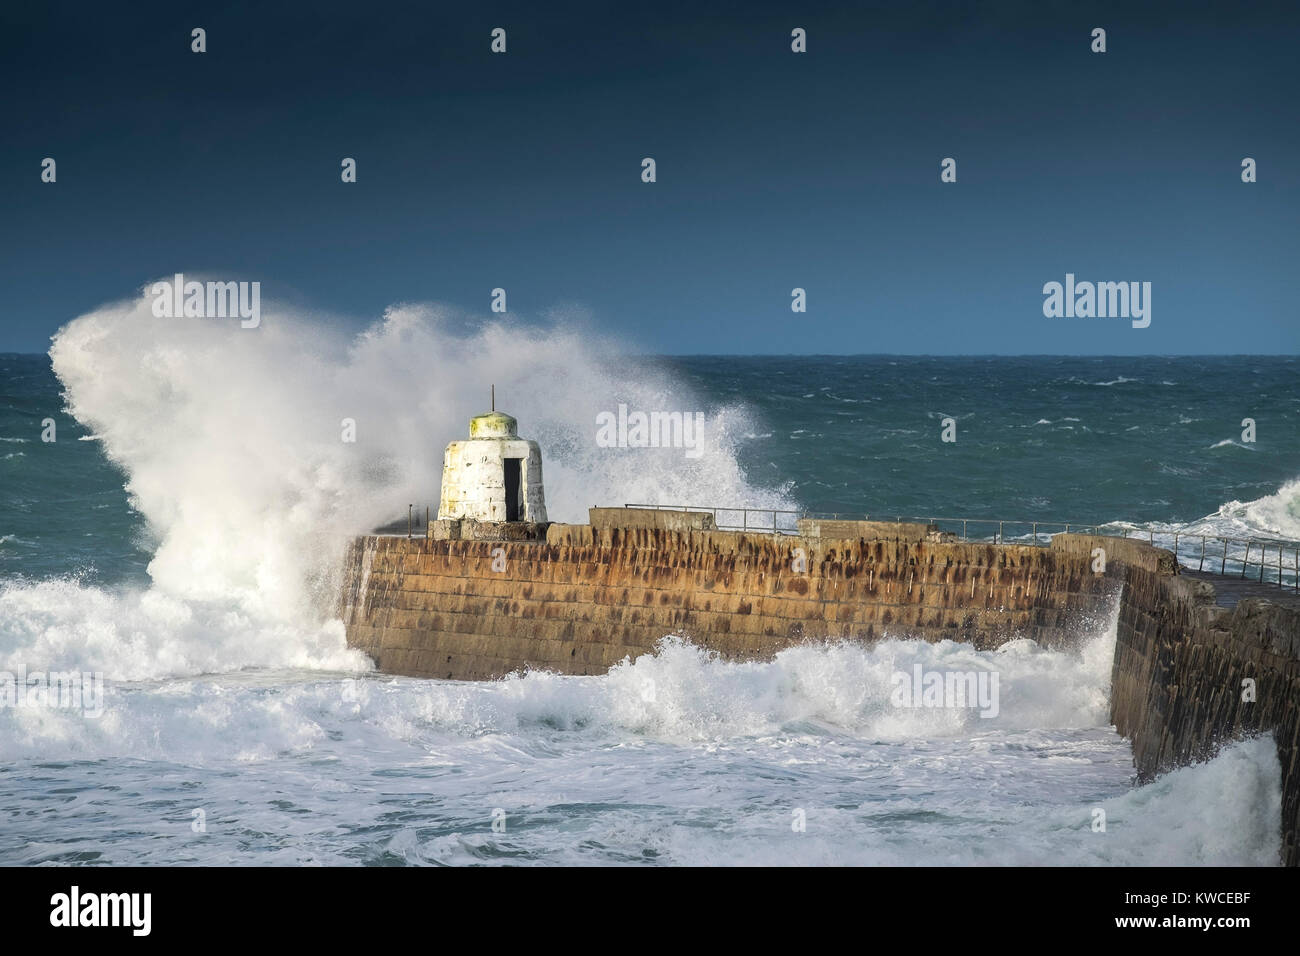 UK weather - Gale force winds driving huge waves into the pier at Portreath Harbour in Cornwall. Stock Photo